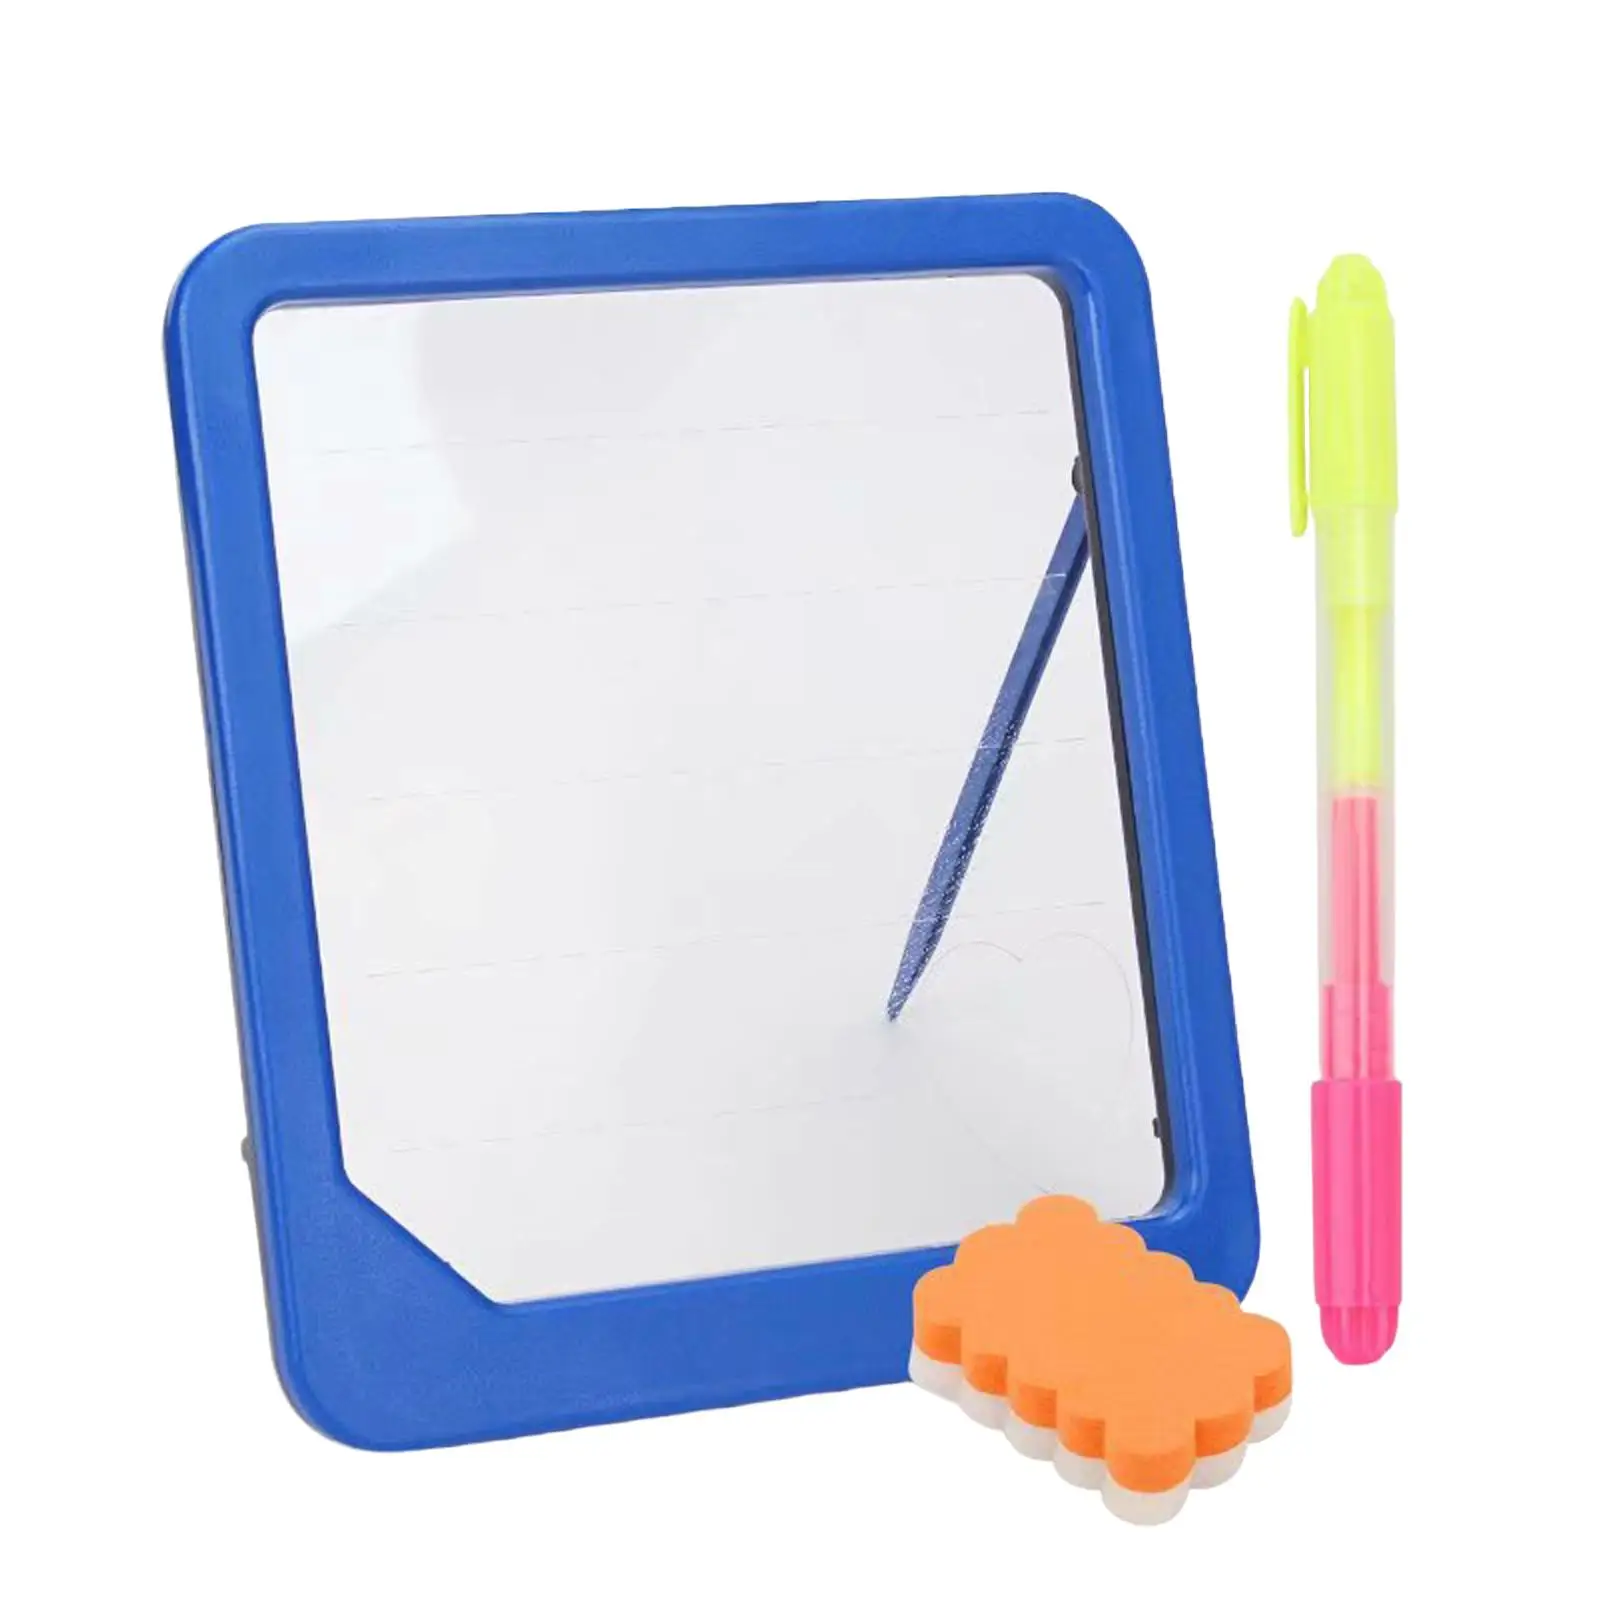 Portable Writing Board Educational Toy Early Math Educational Toy Child Sensory Learning Aids LED Toys for Children Students